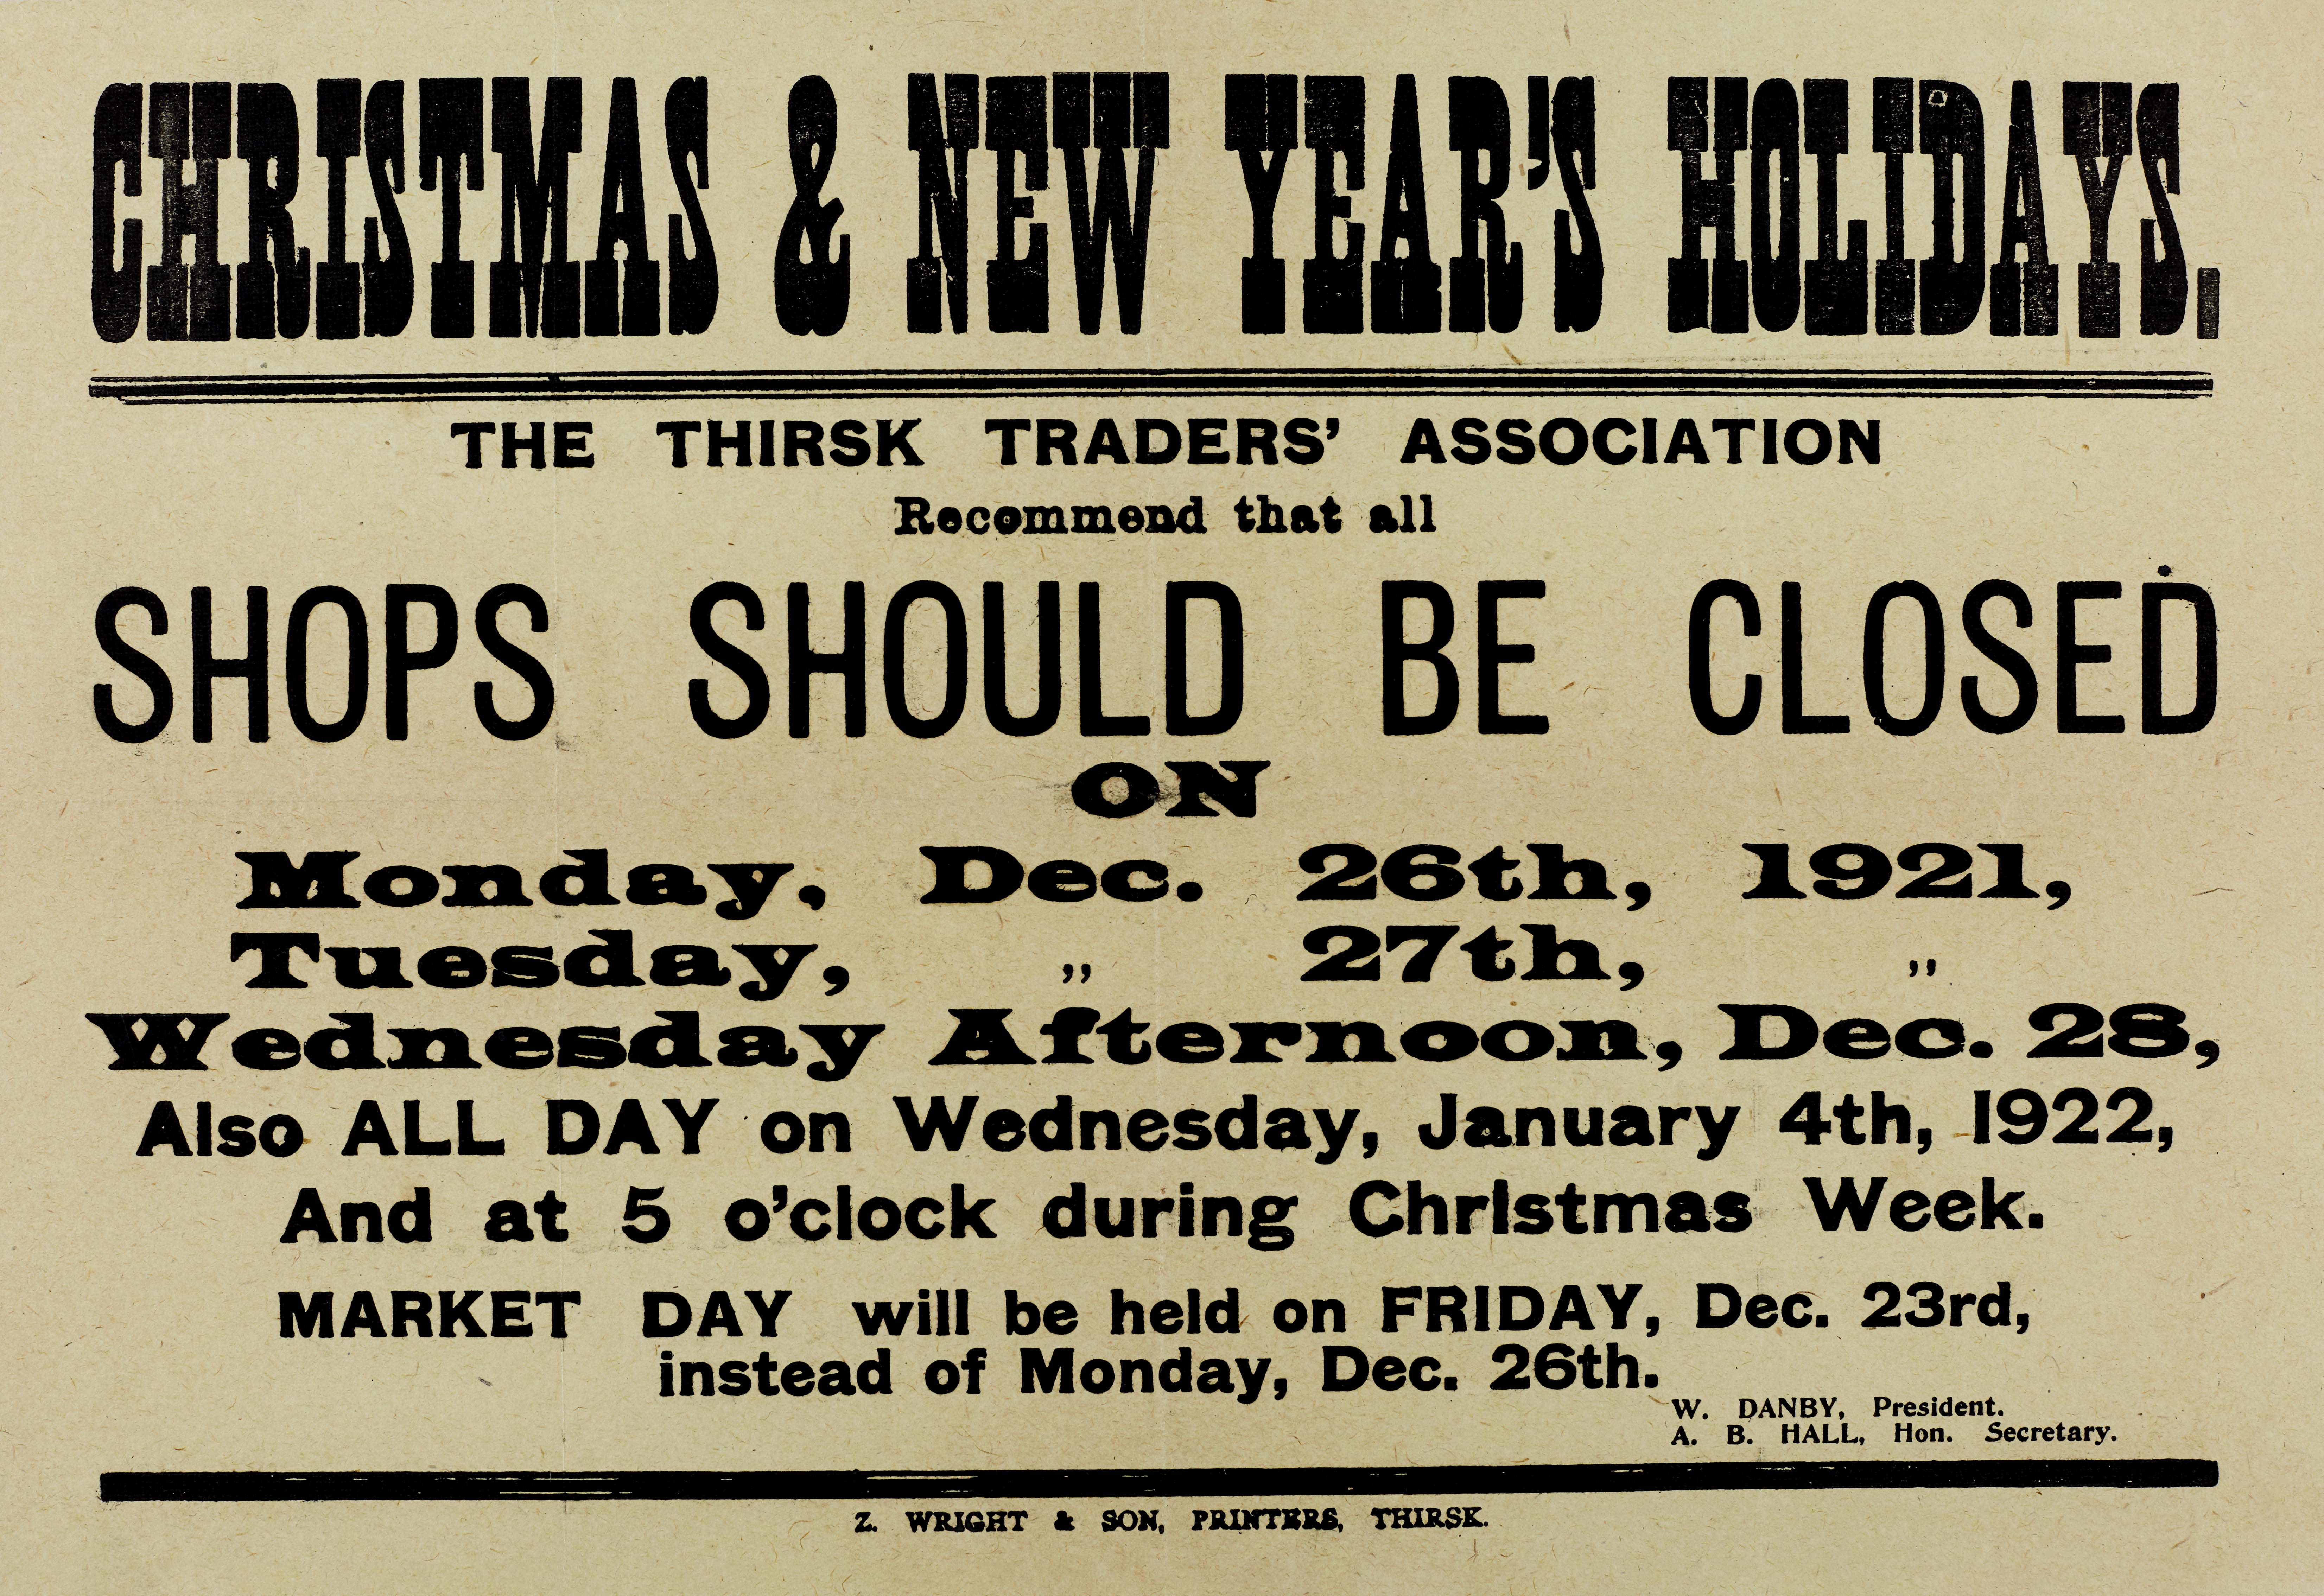 A Thirsk Traders’ Association Christmas notice